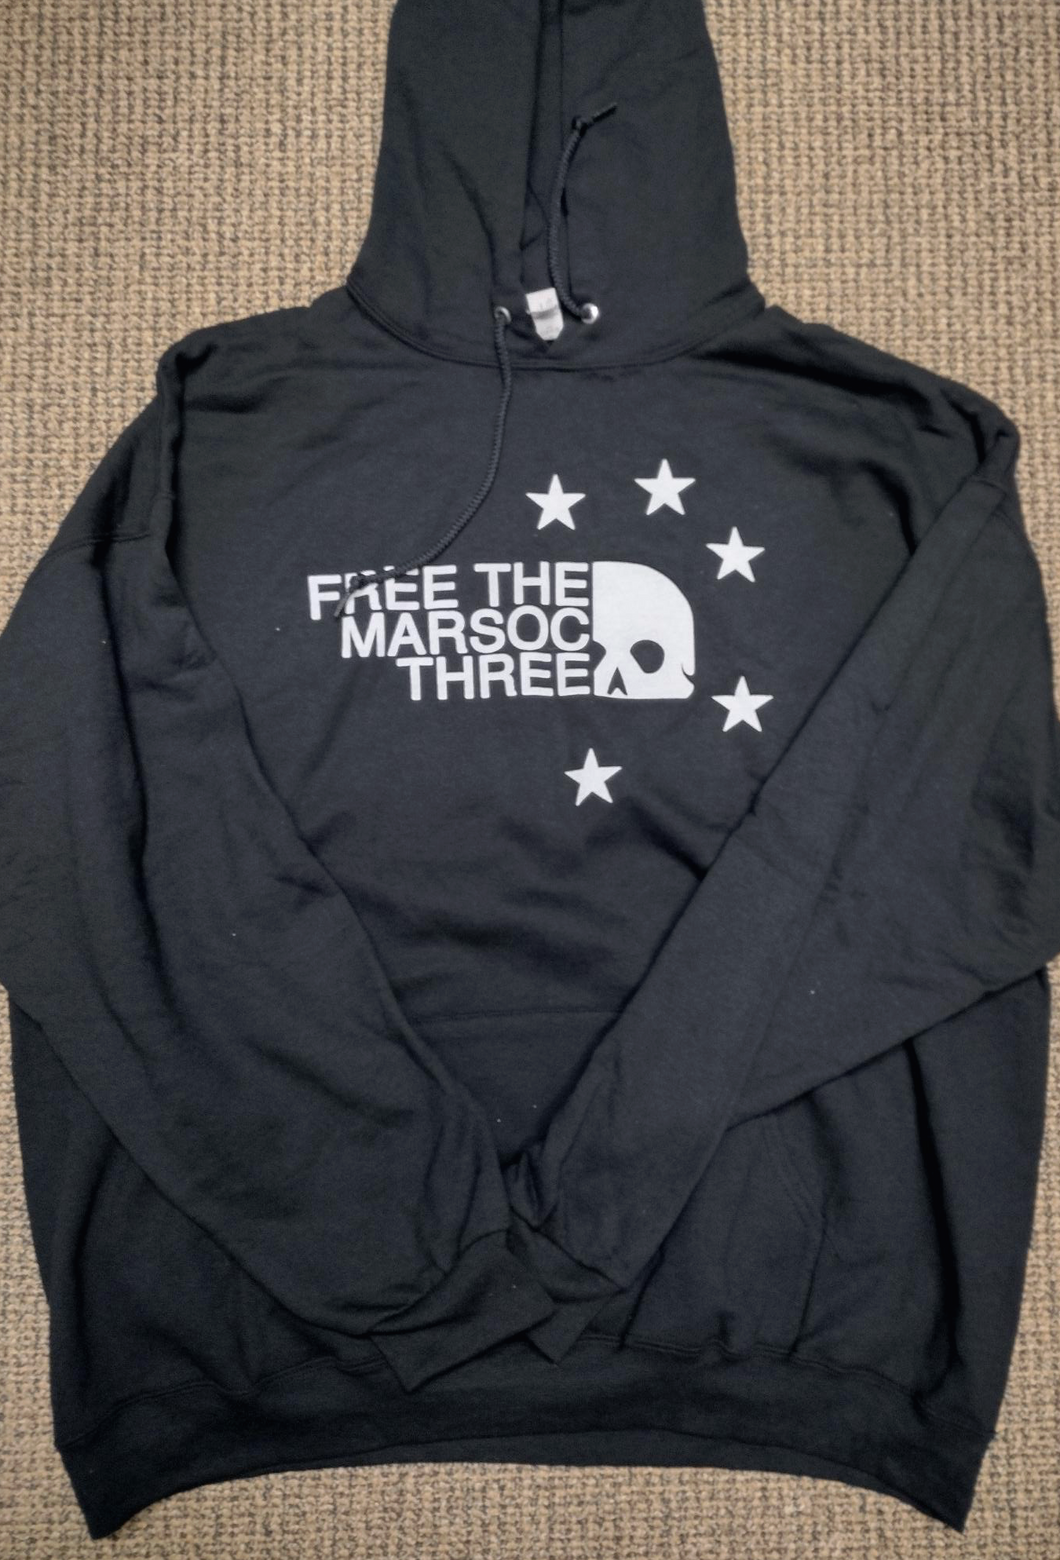 'Free The MARSOC Three' Hoodie From Green Wolf Tactical